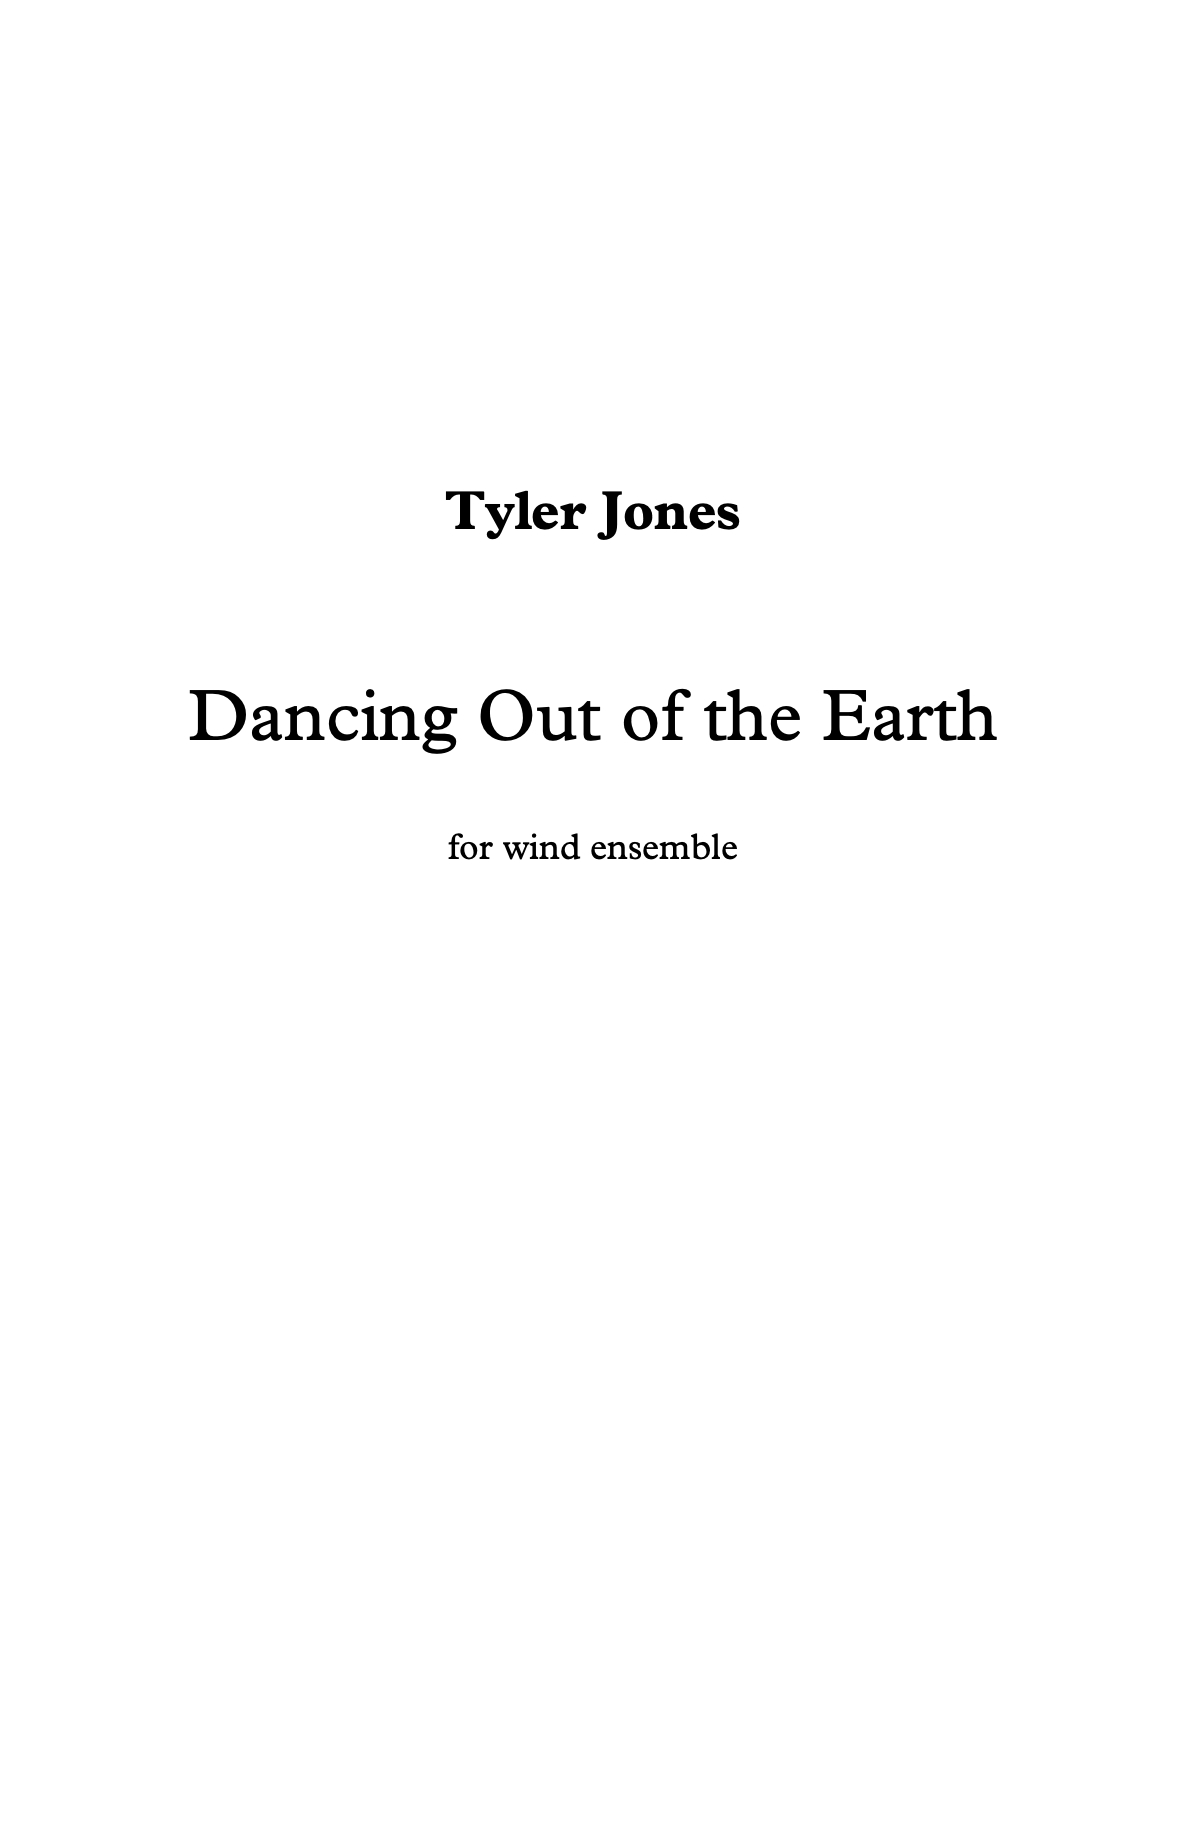 Dancing Out Of The Earth (Score Only) by Tyler Jones